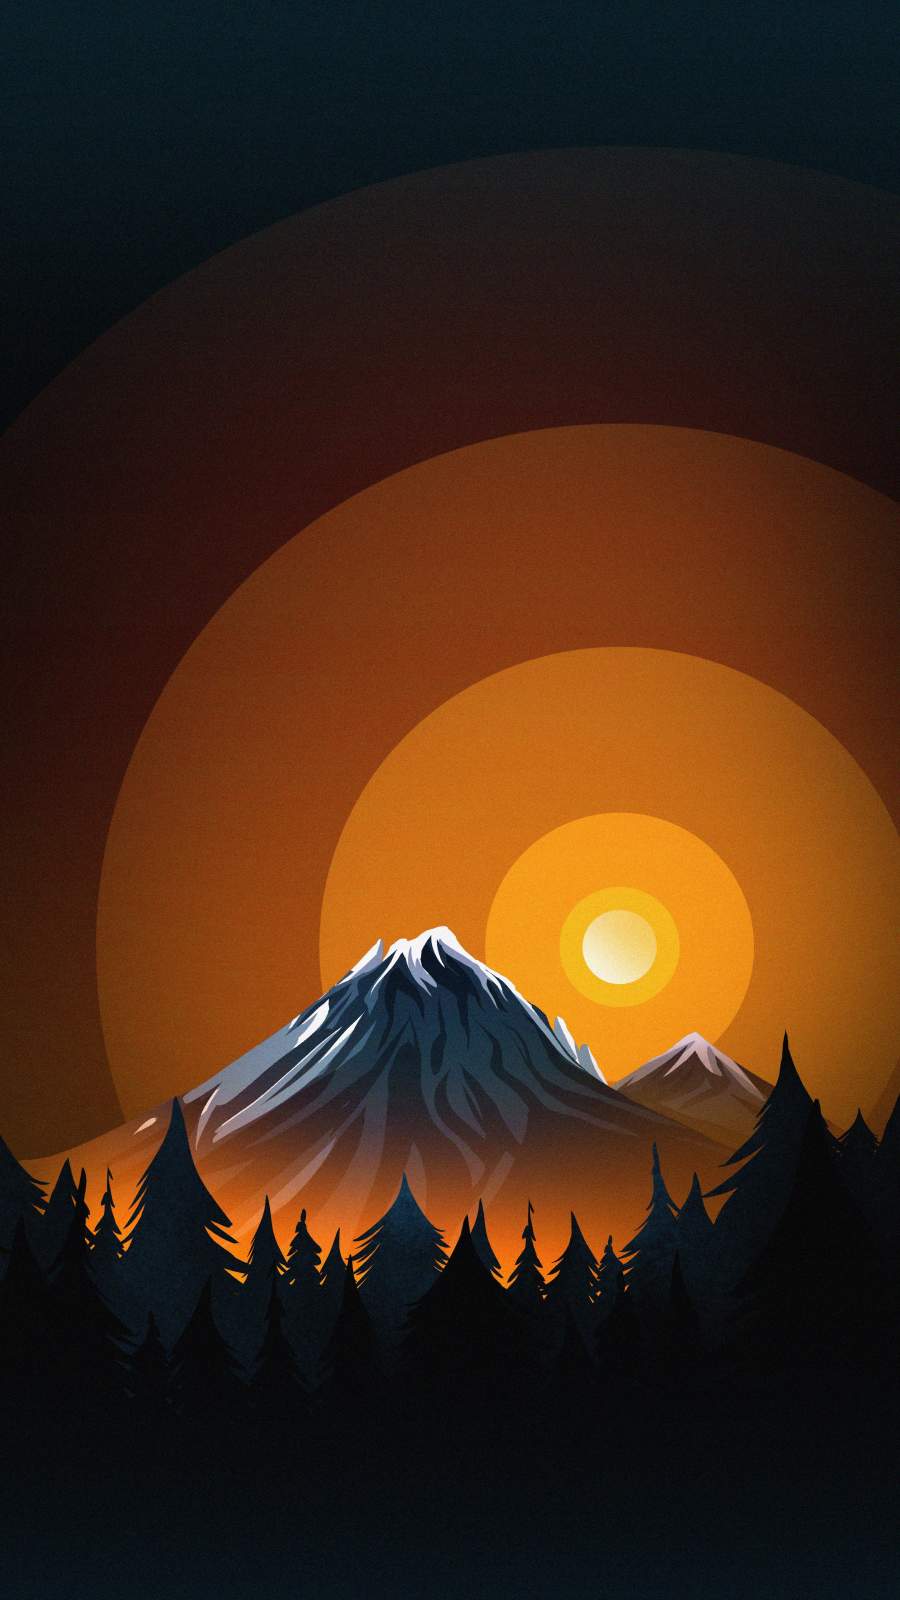 Minimal Mountains Nature View - iPhone Wallpapers : iPhone Wallpapers